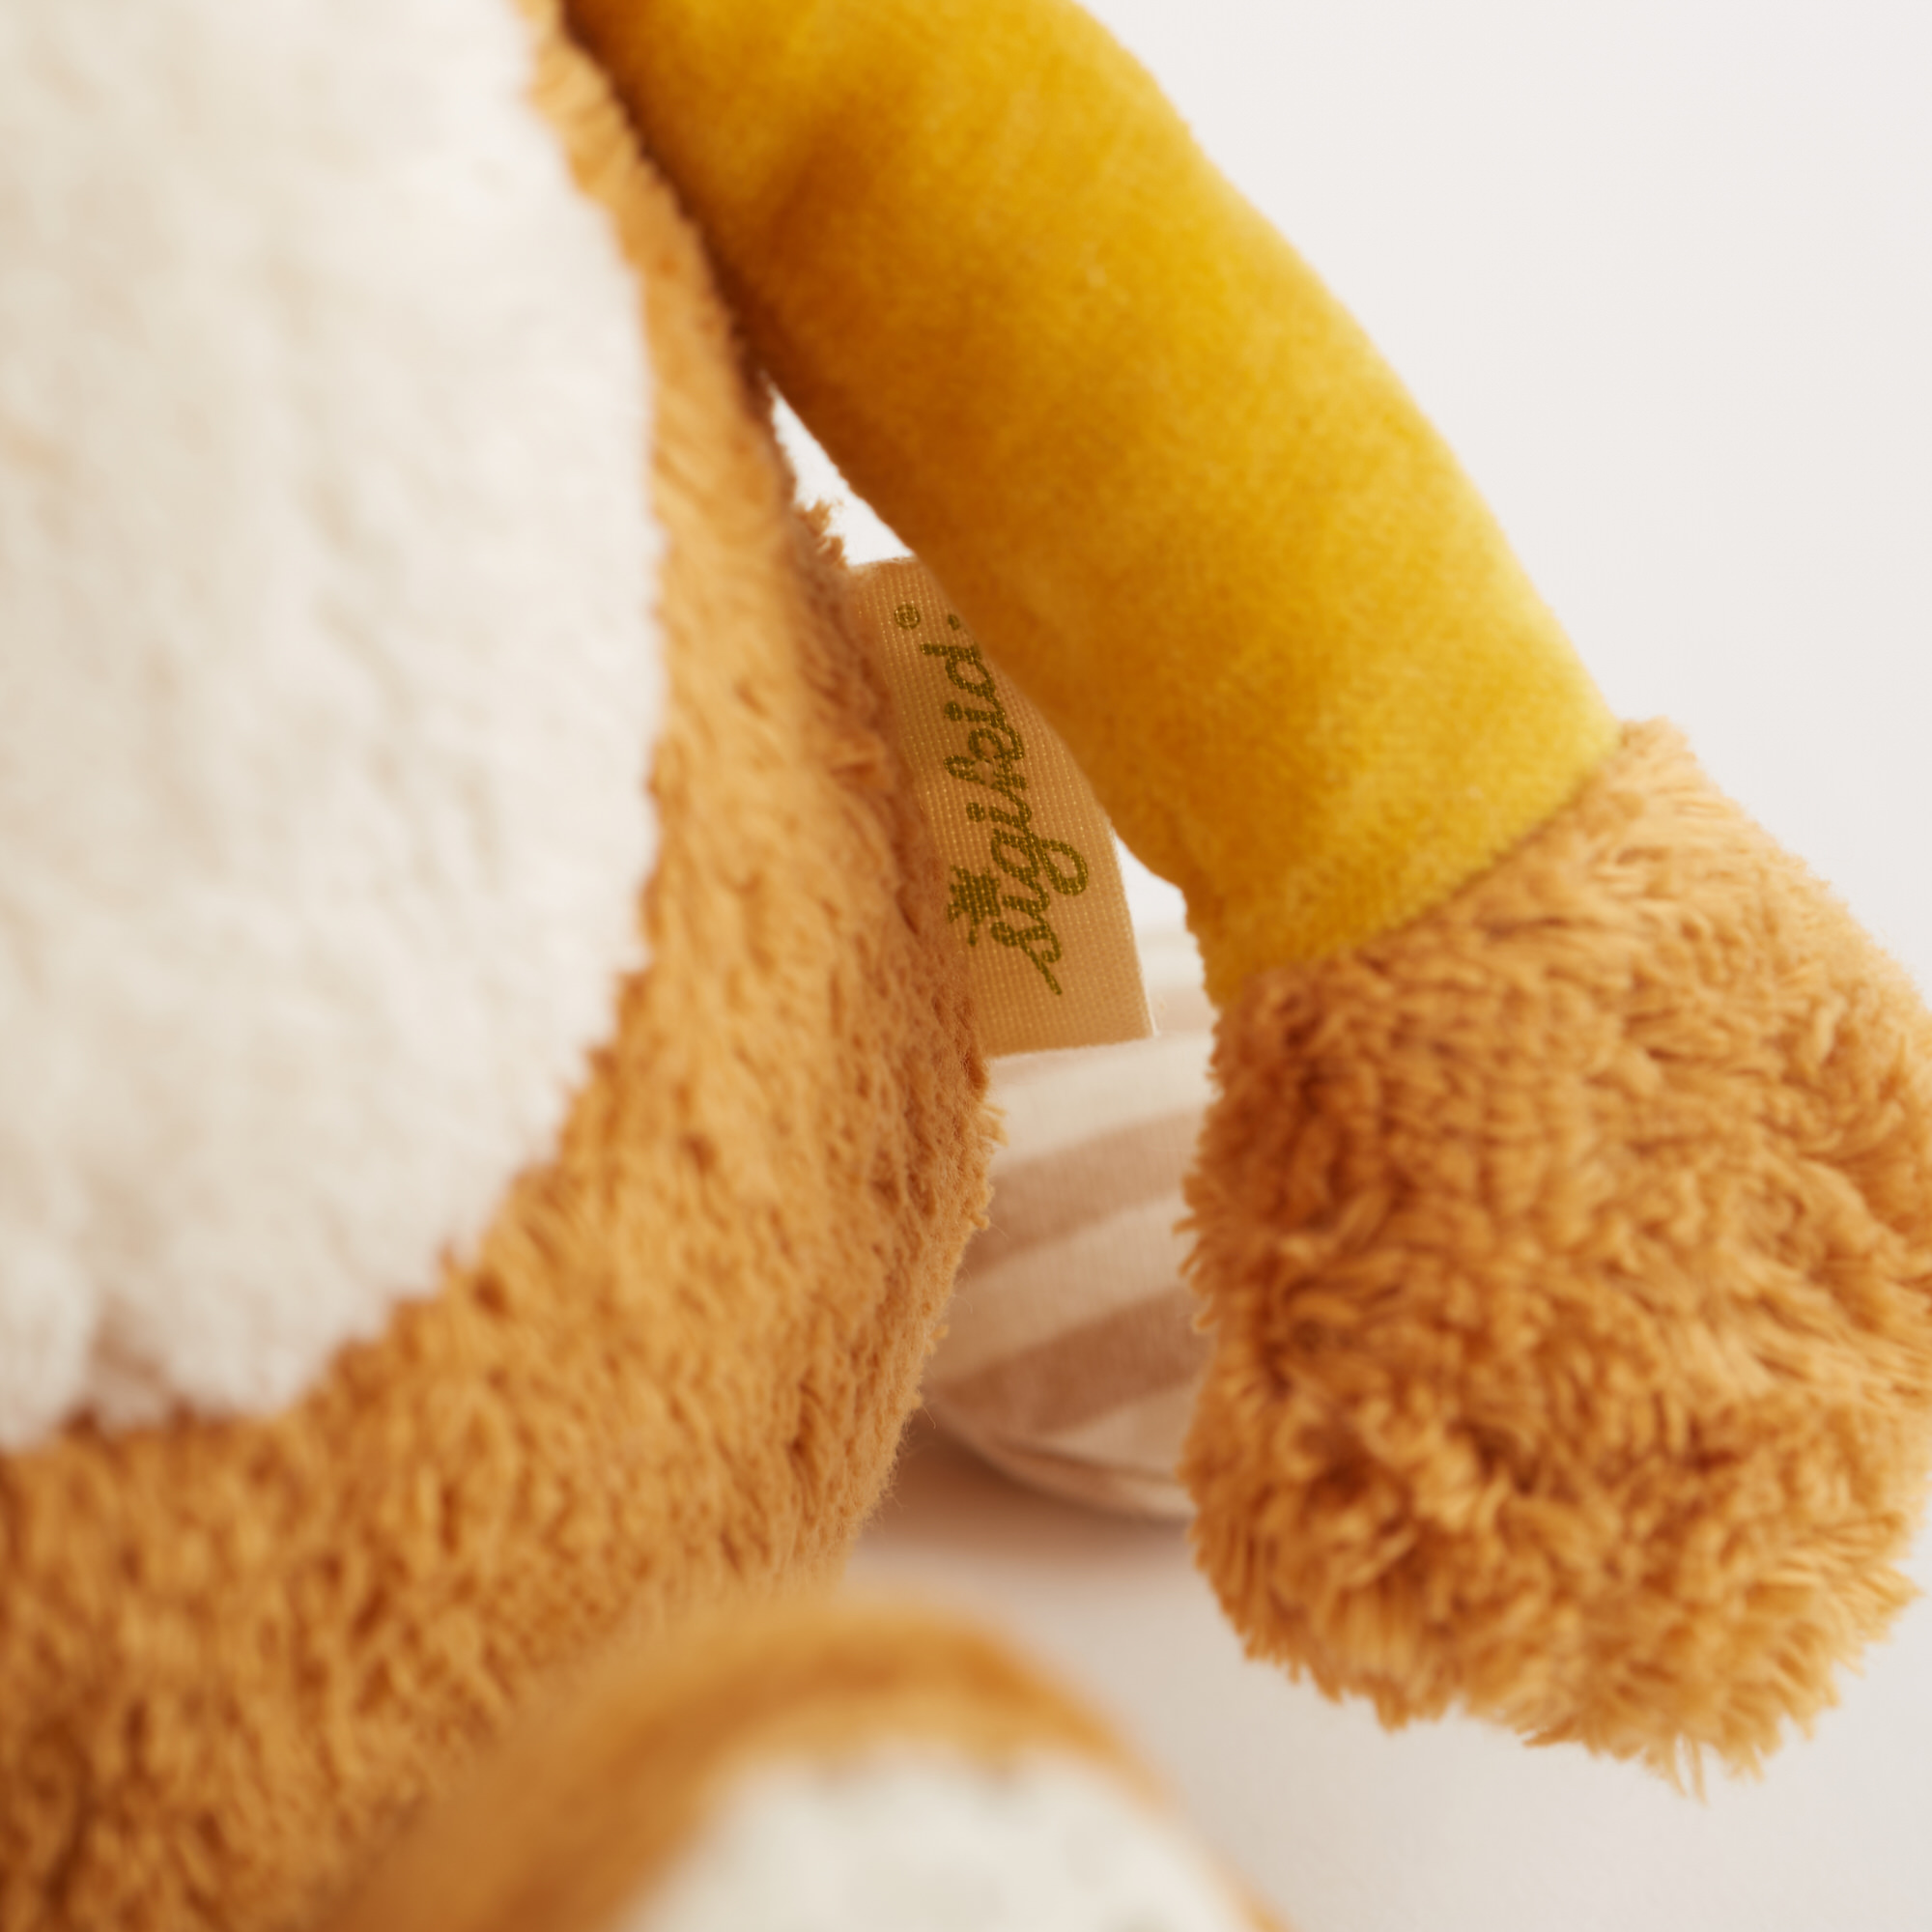 Organic soft toy lion, patchwork sweety